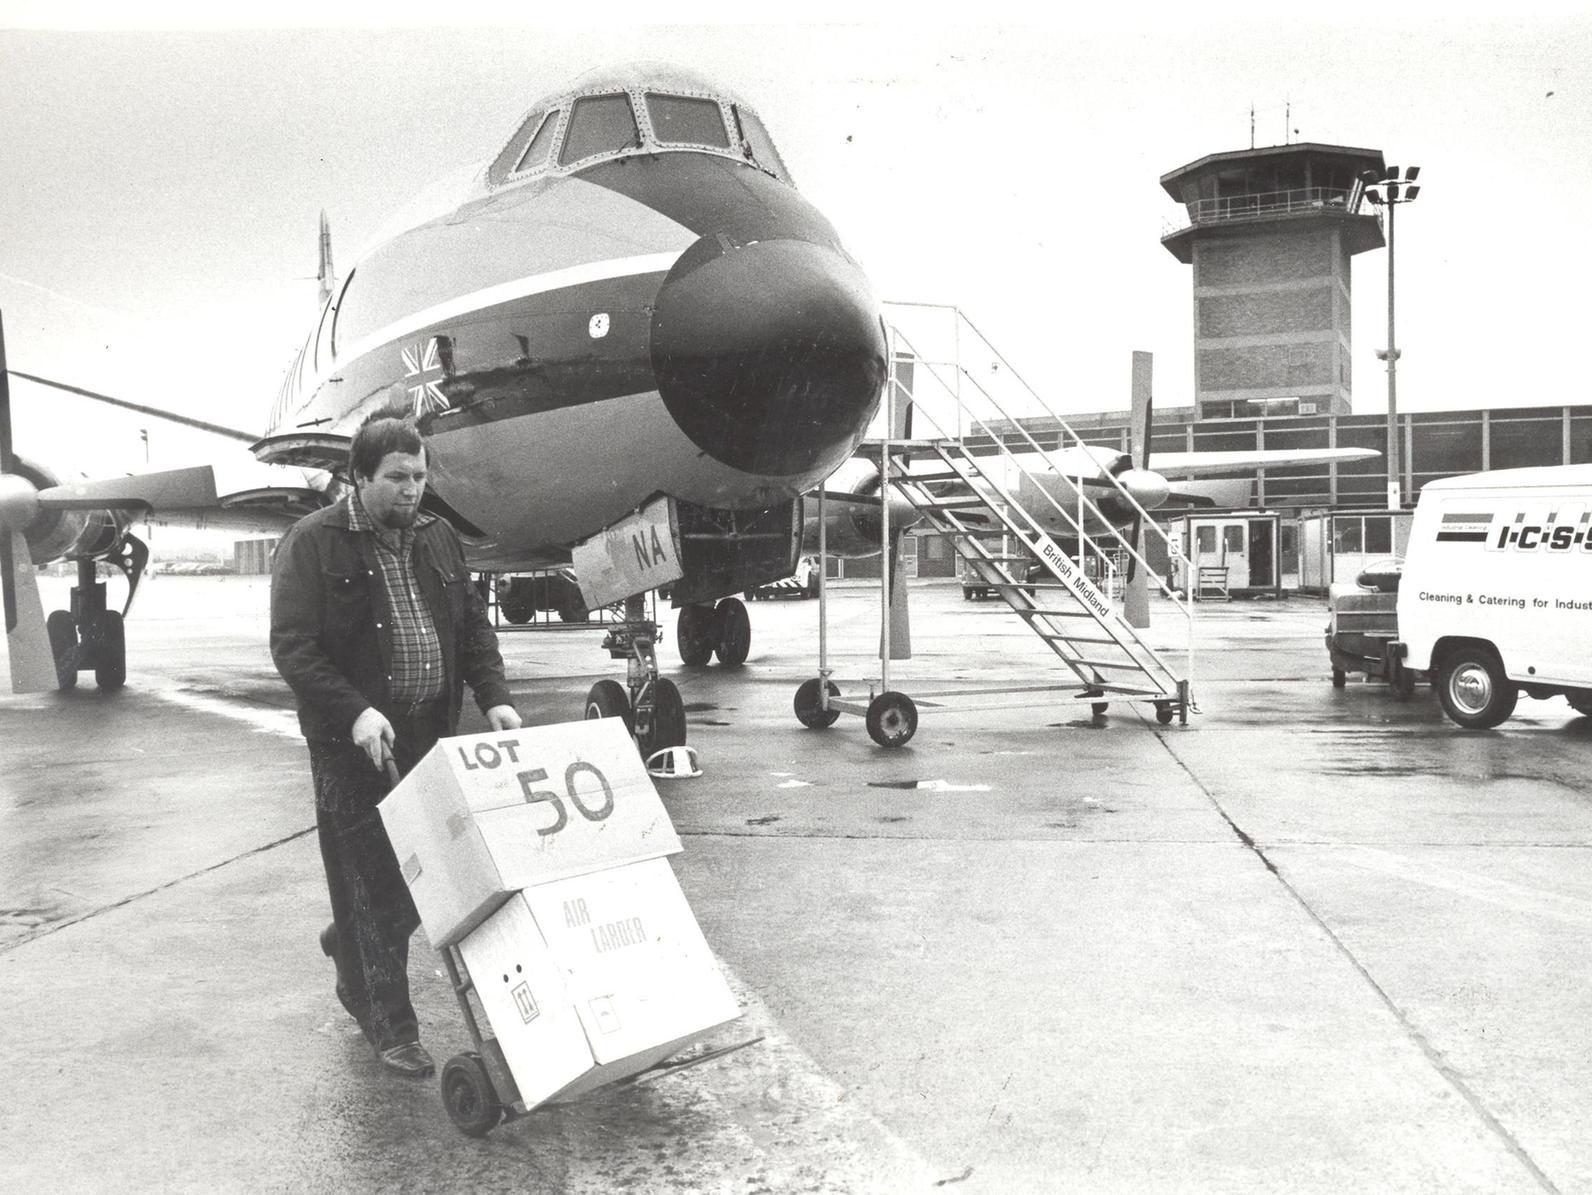 Cargo is unloaded. Freight facilities at the airport were always busy in the early 1980s.